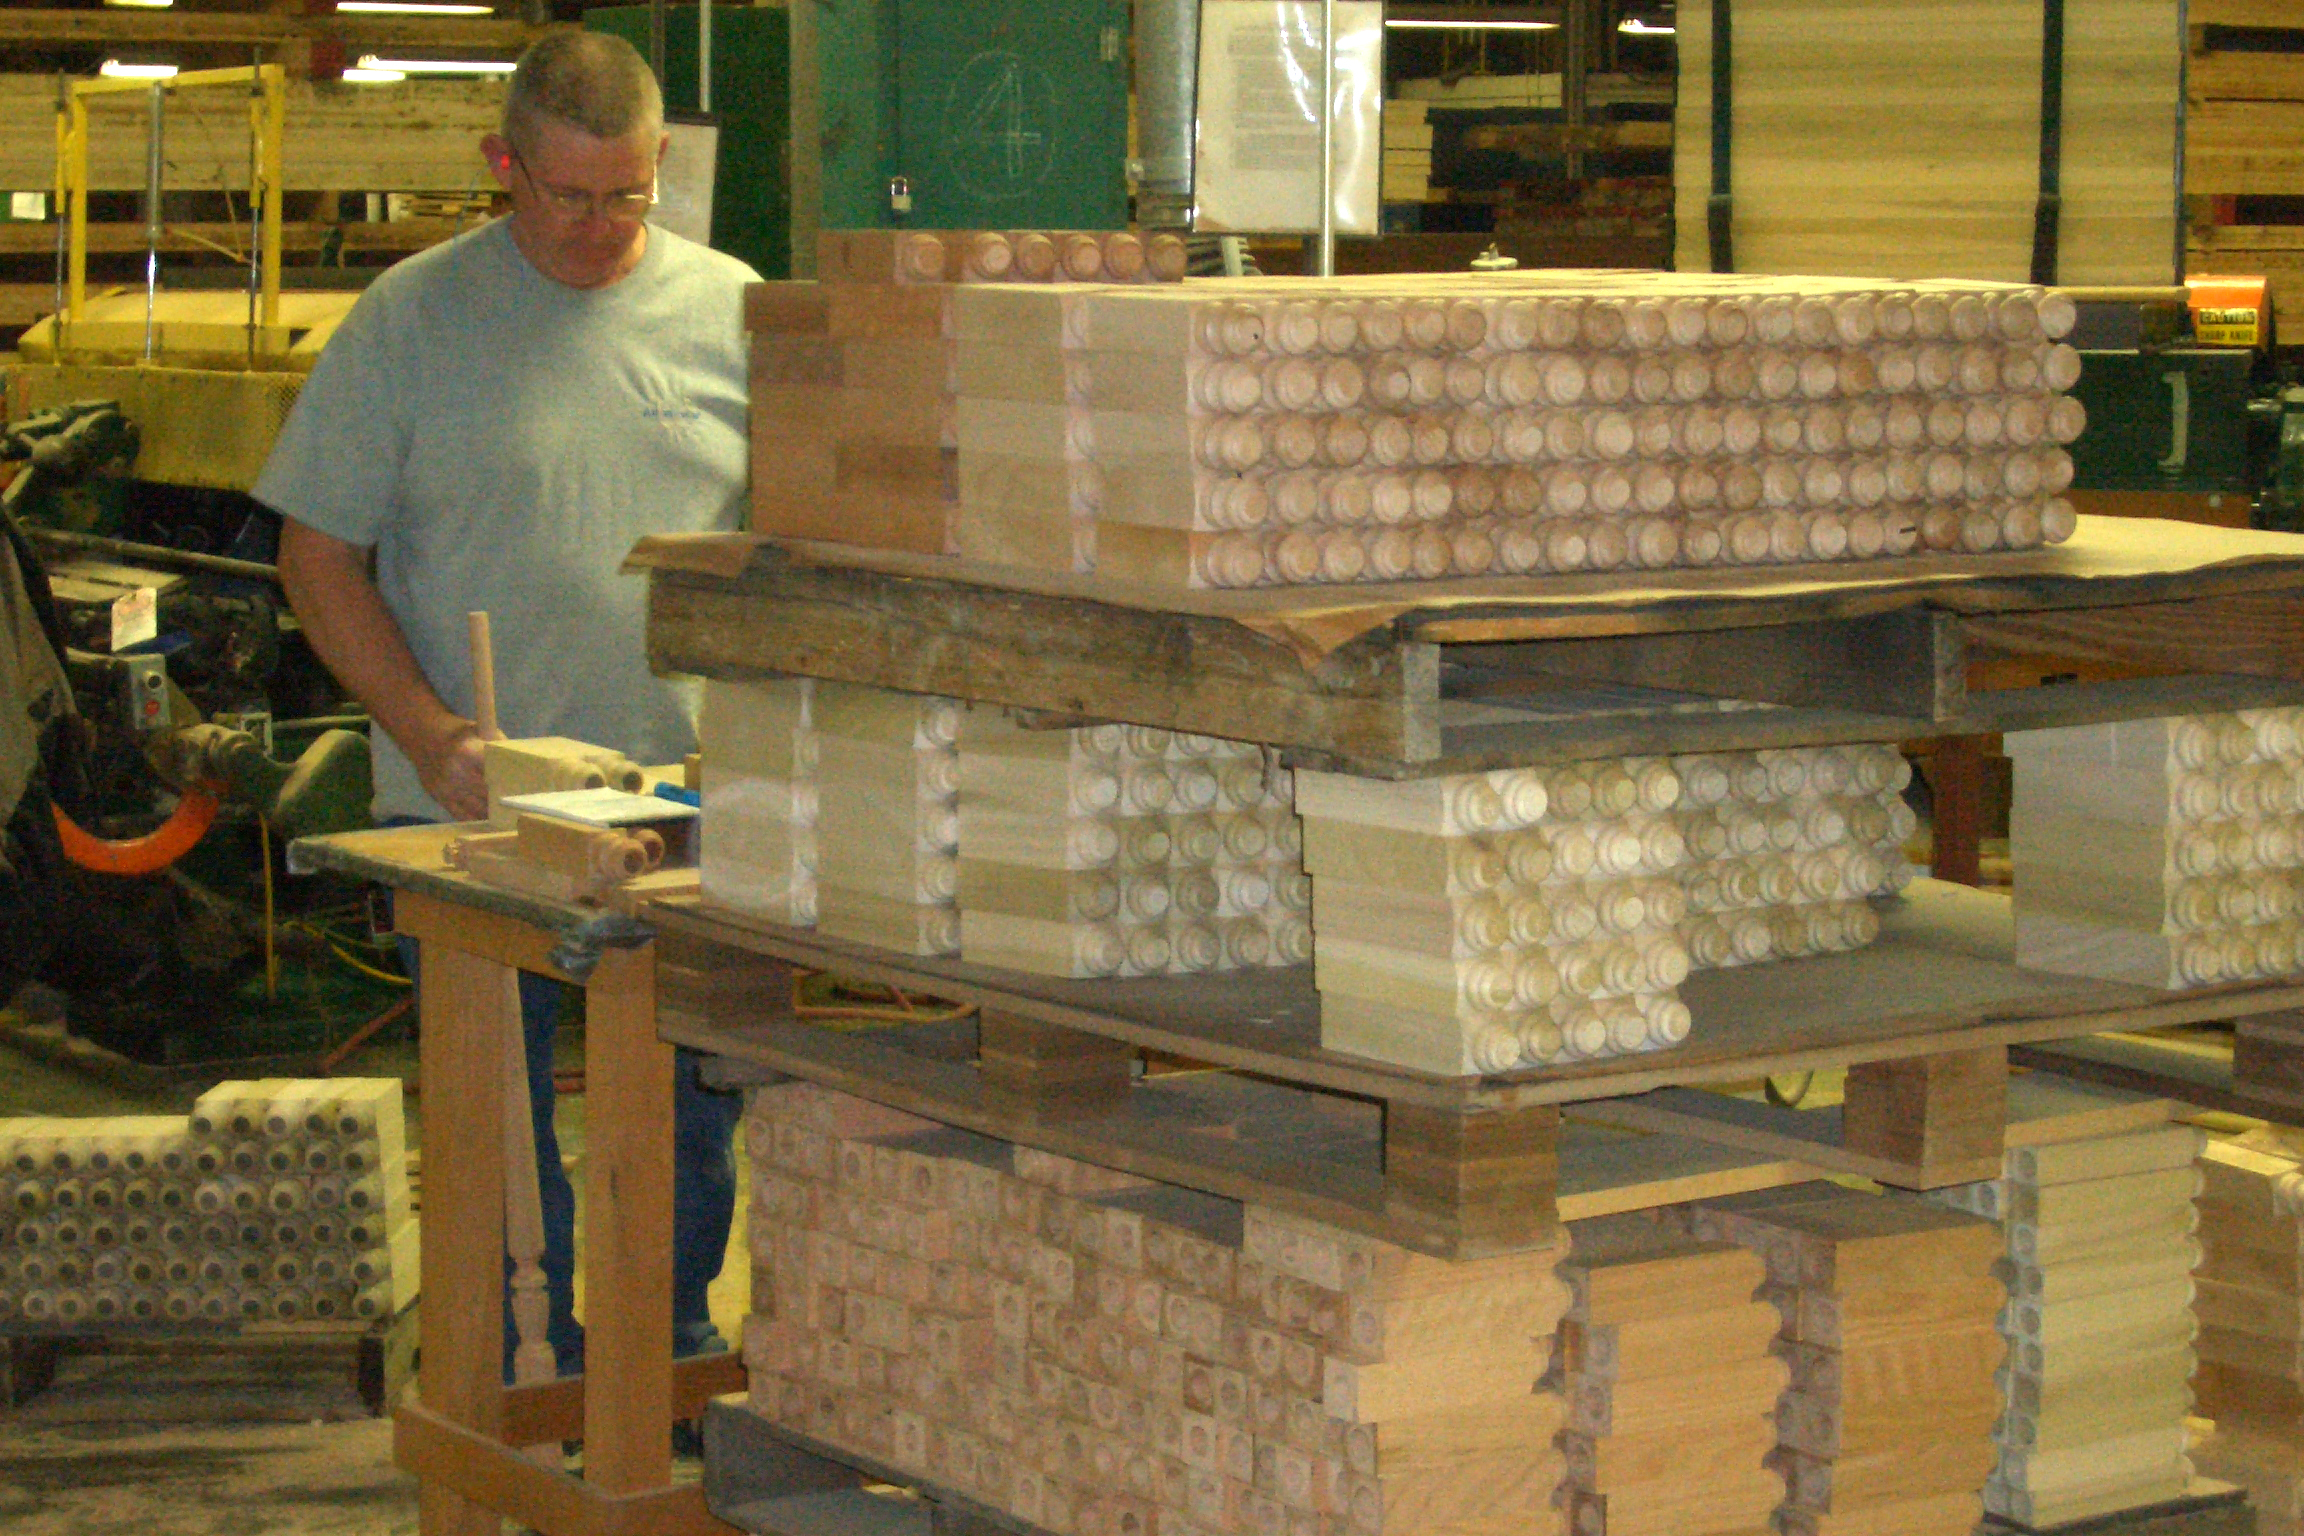 A man stands behind a pallet of wooden stair parts in a factory.